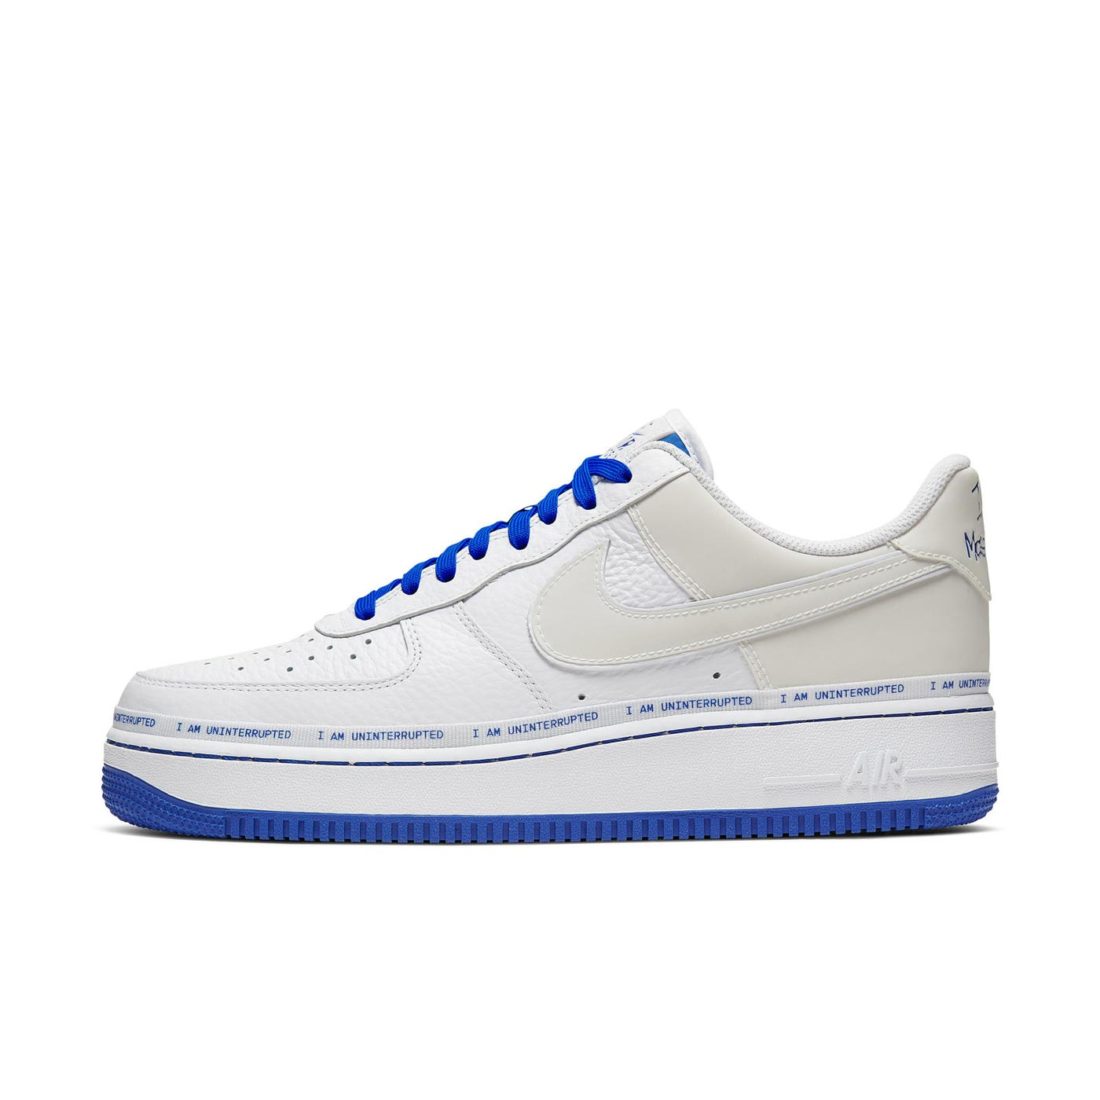 what size am i in nike air force 1